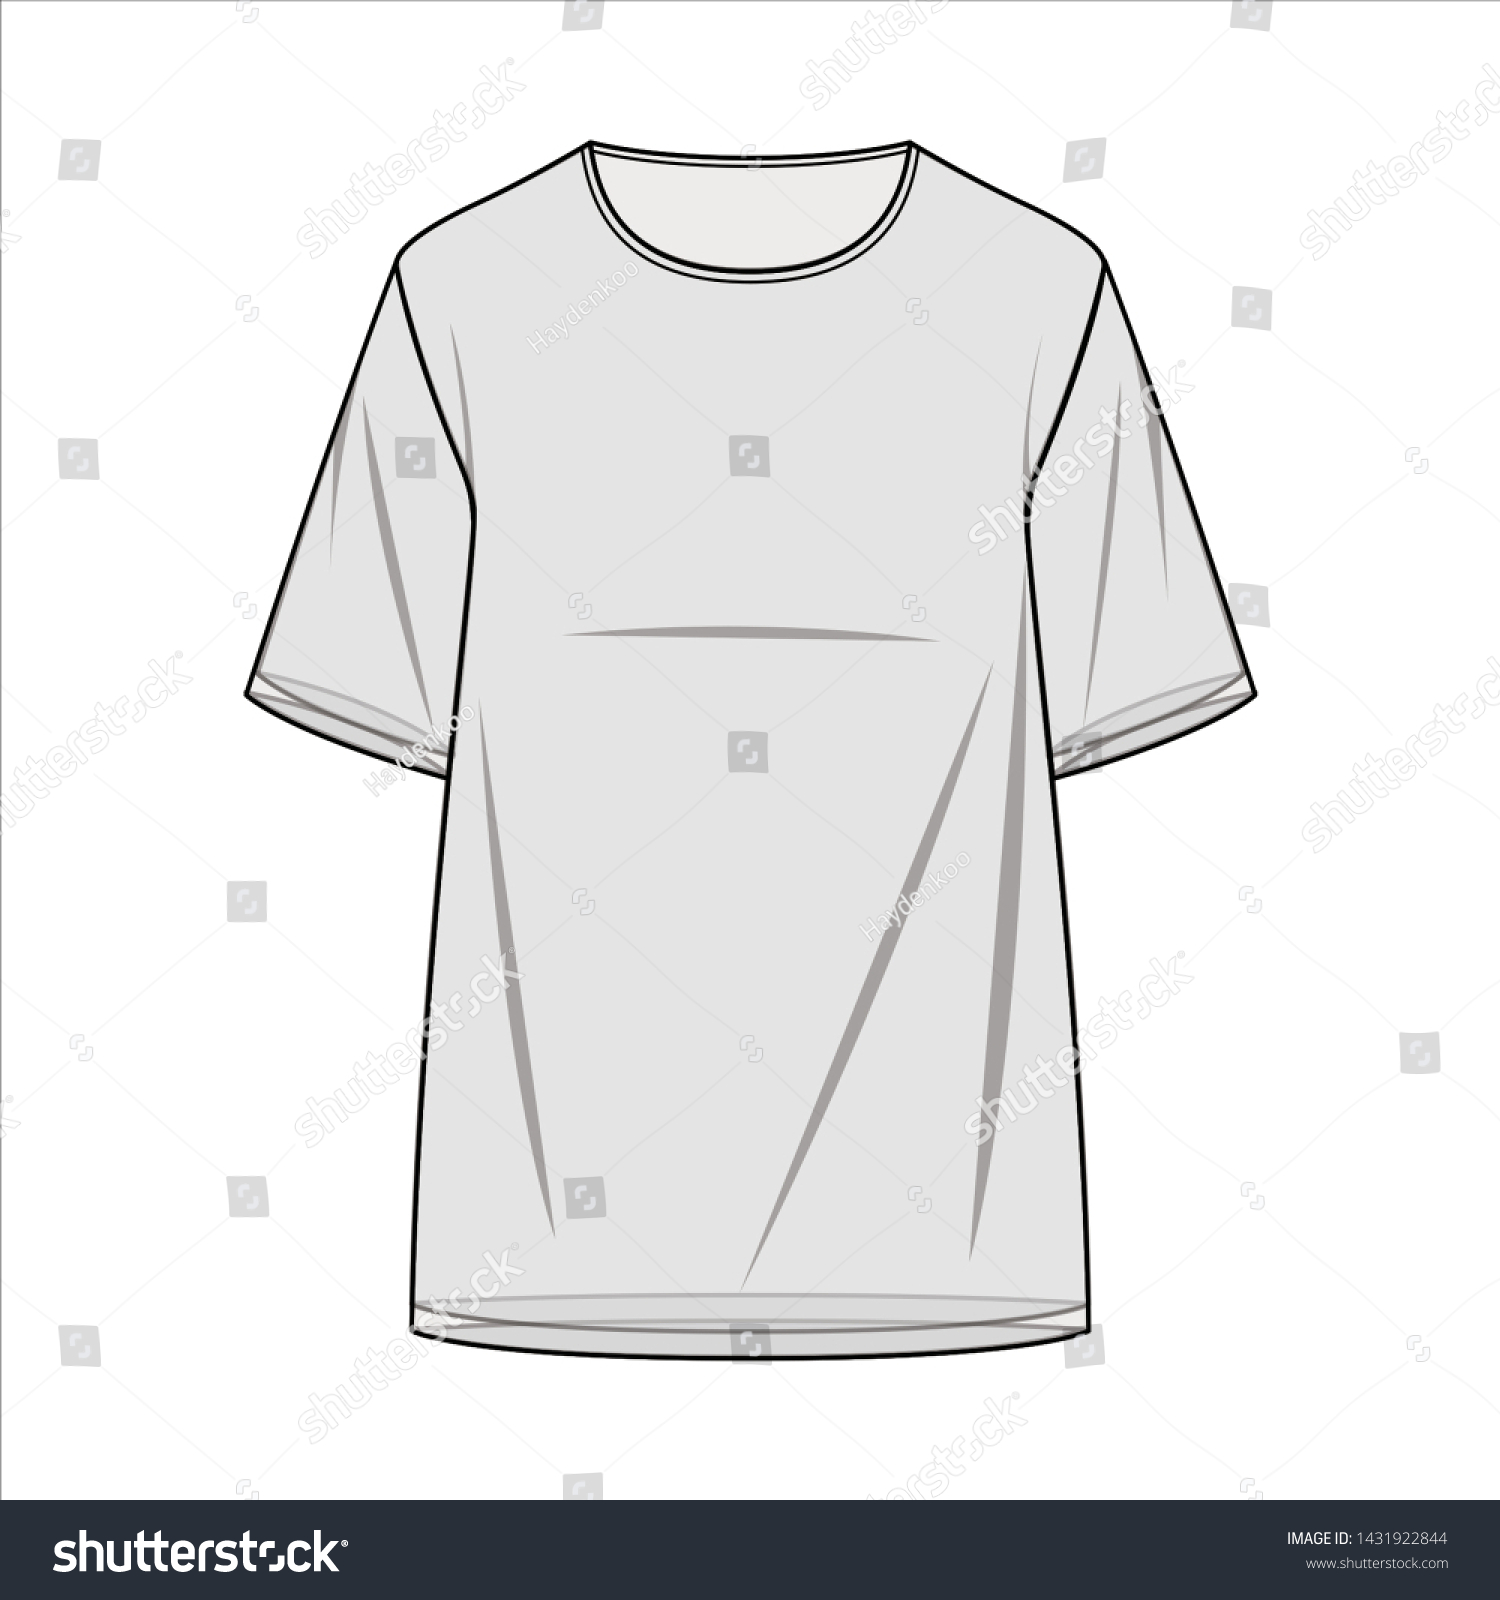 Sweater Top Fashion Flat Sketche Stock Vector (Royalty Free) 1431922844 ...